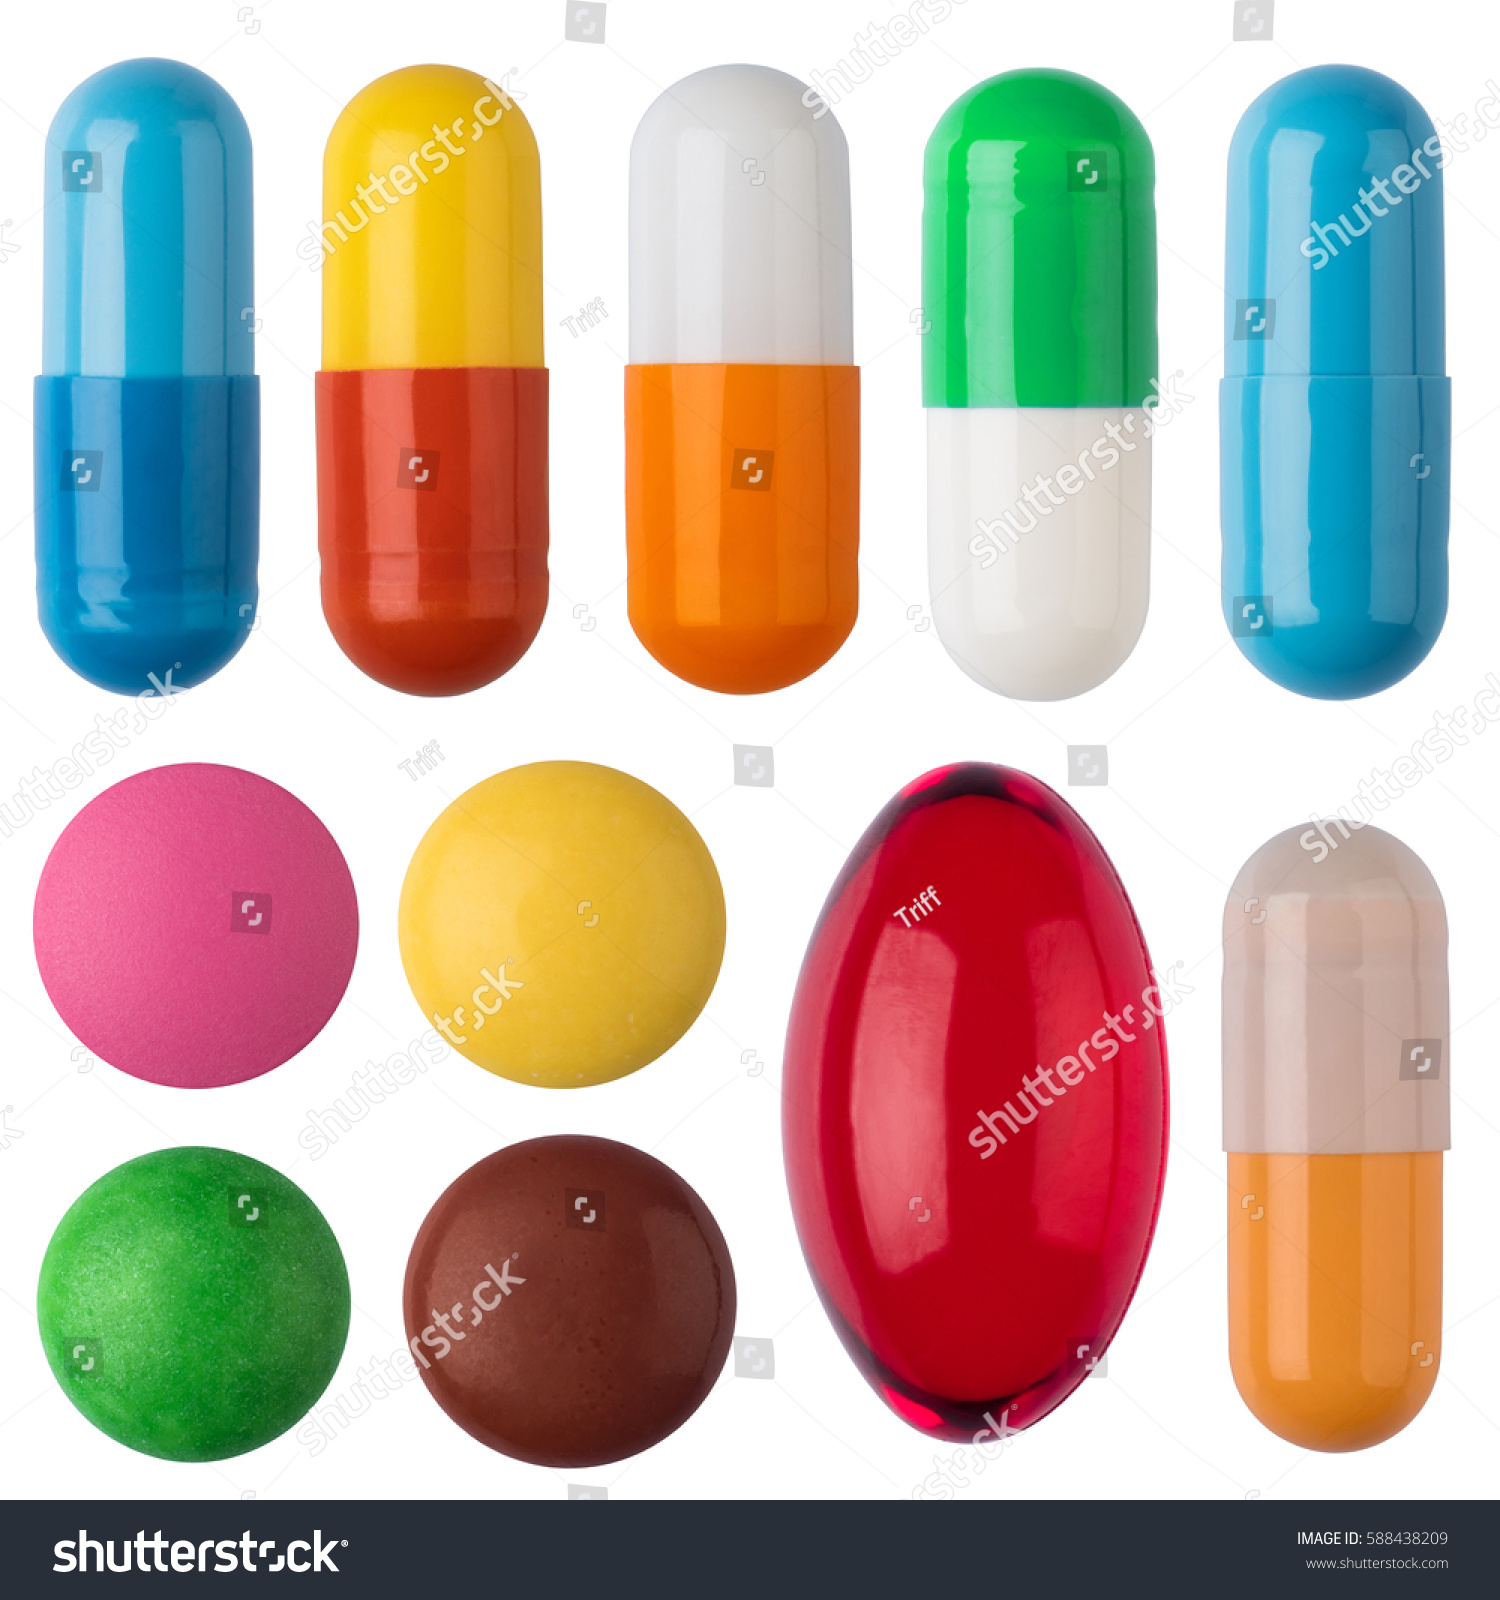 Many colorful pills and tablets isolated on white. #588438209